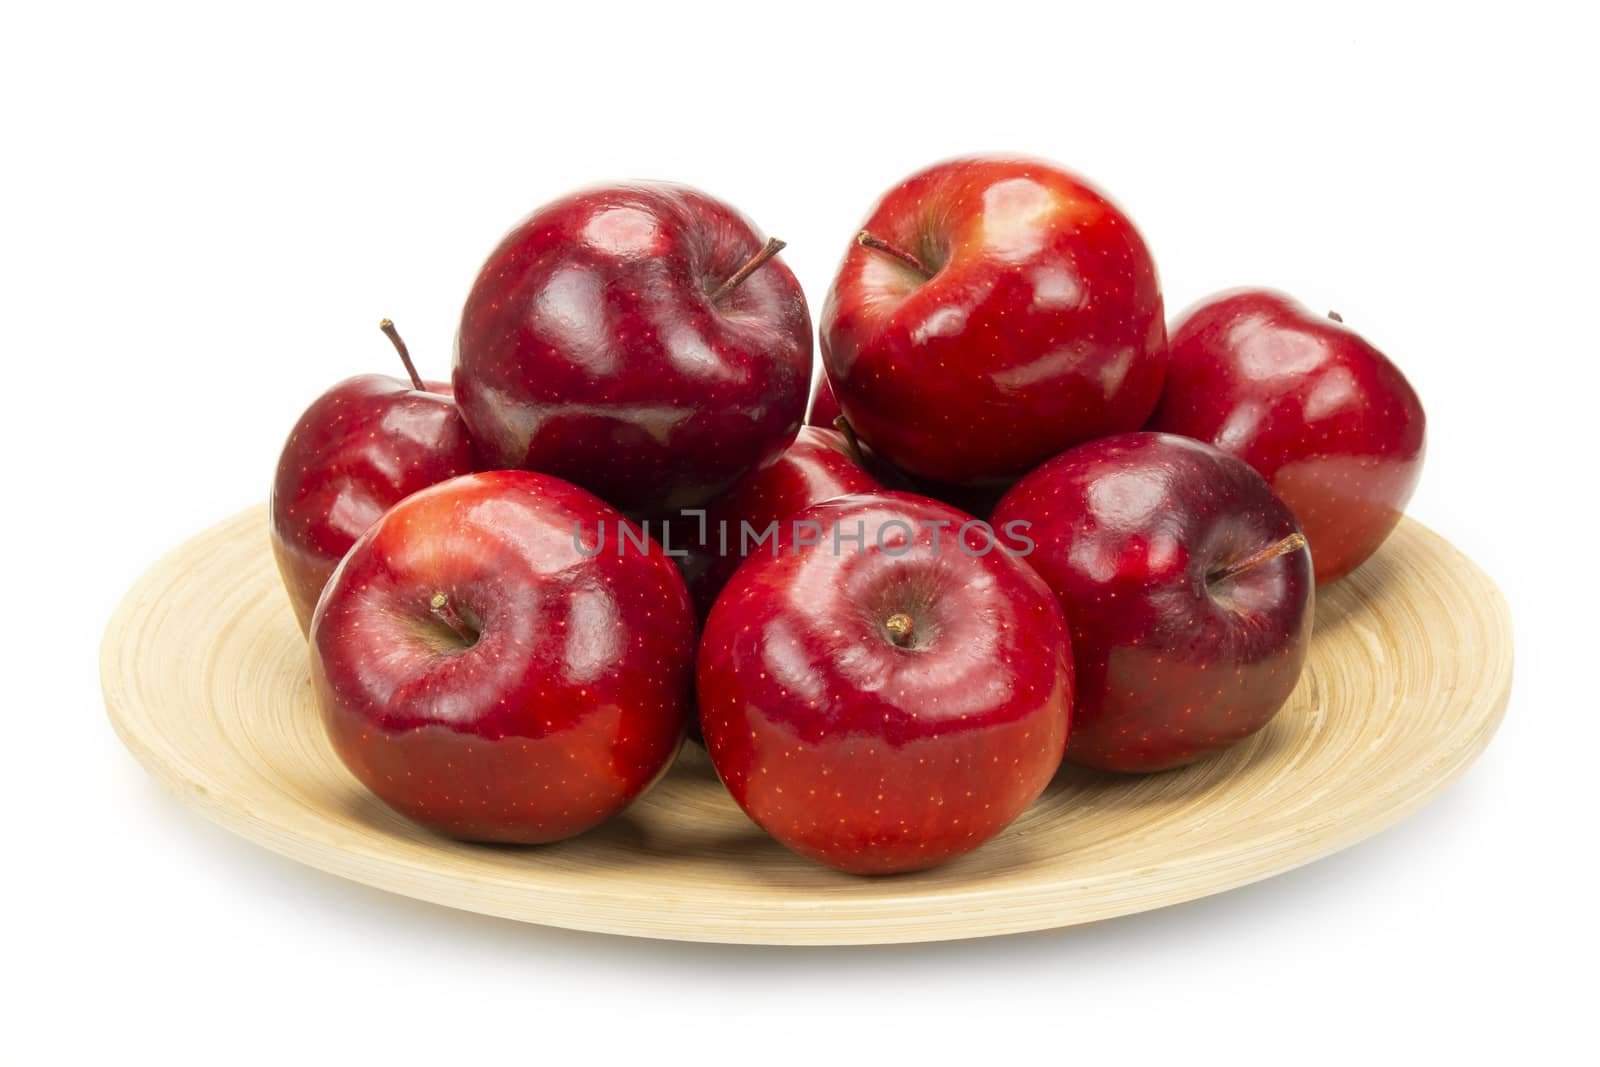 Red apples on a bamboo plate by Nawoot